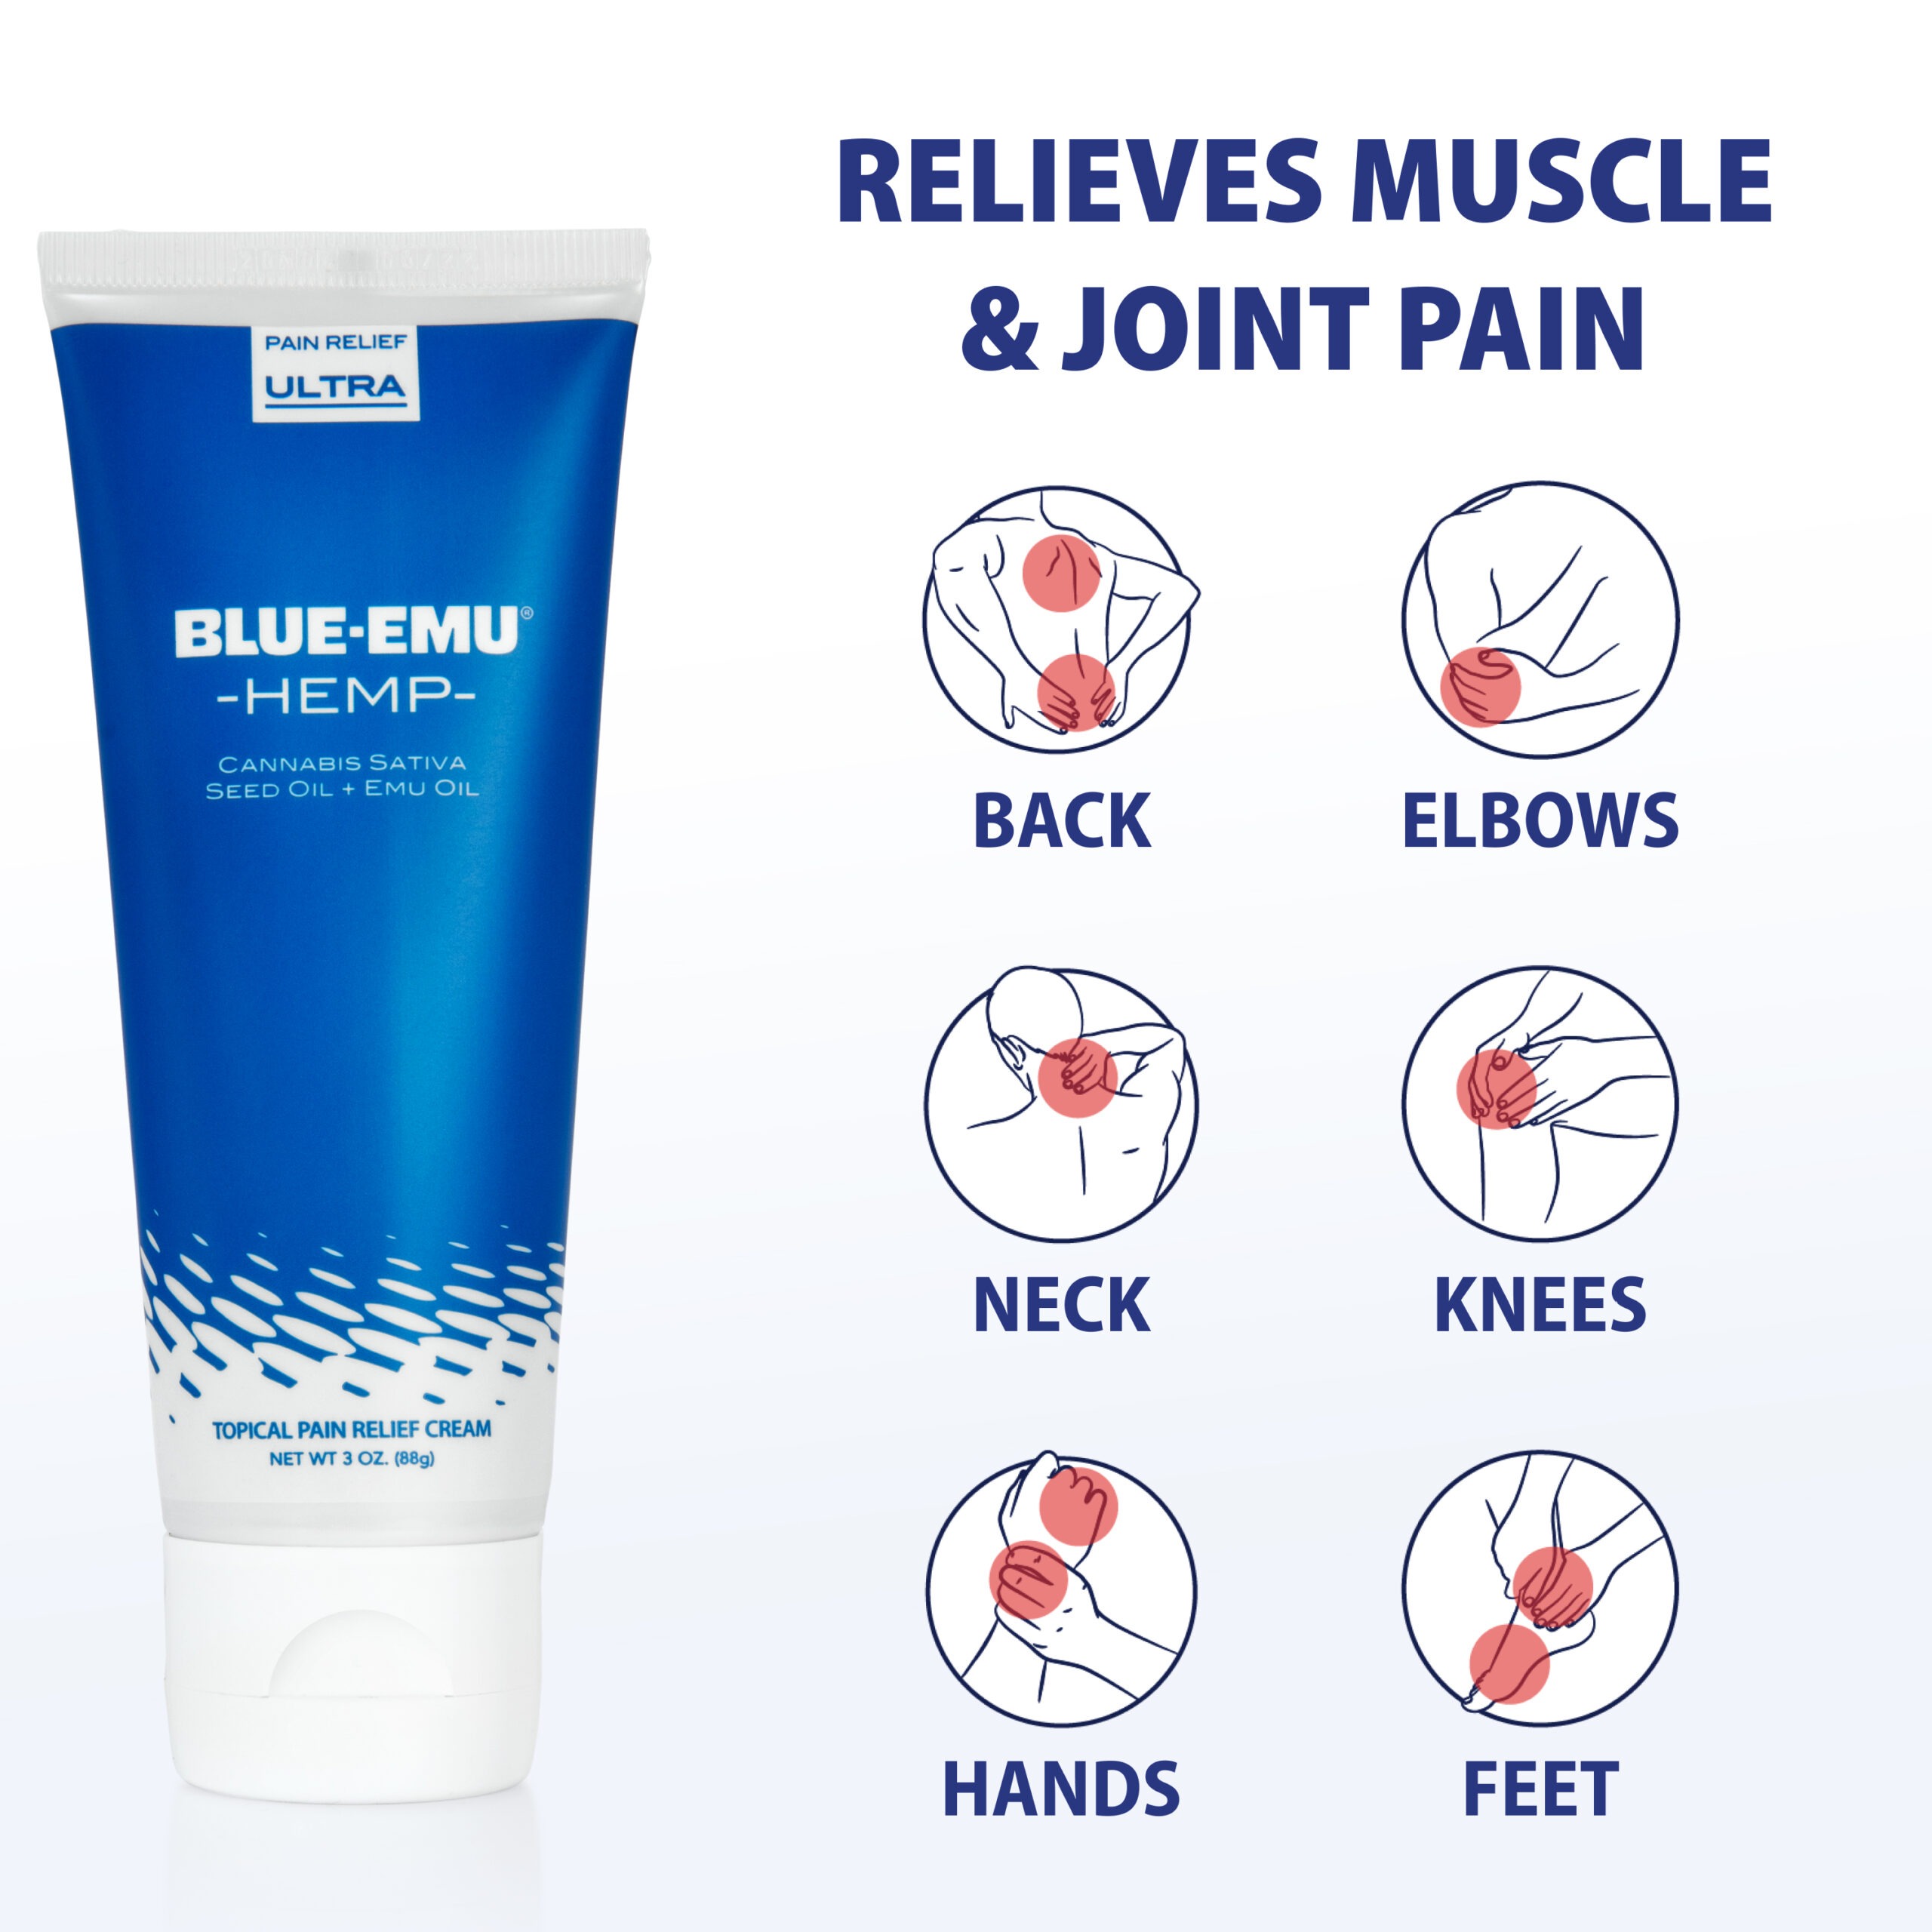 Blue Emu Arthritis Maximum Pain Relief Topical Cream for Muscles, Joints  and Strains w/Emu Oil, 3oz,2 Pack